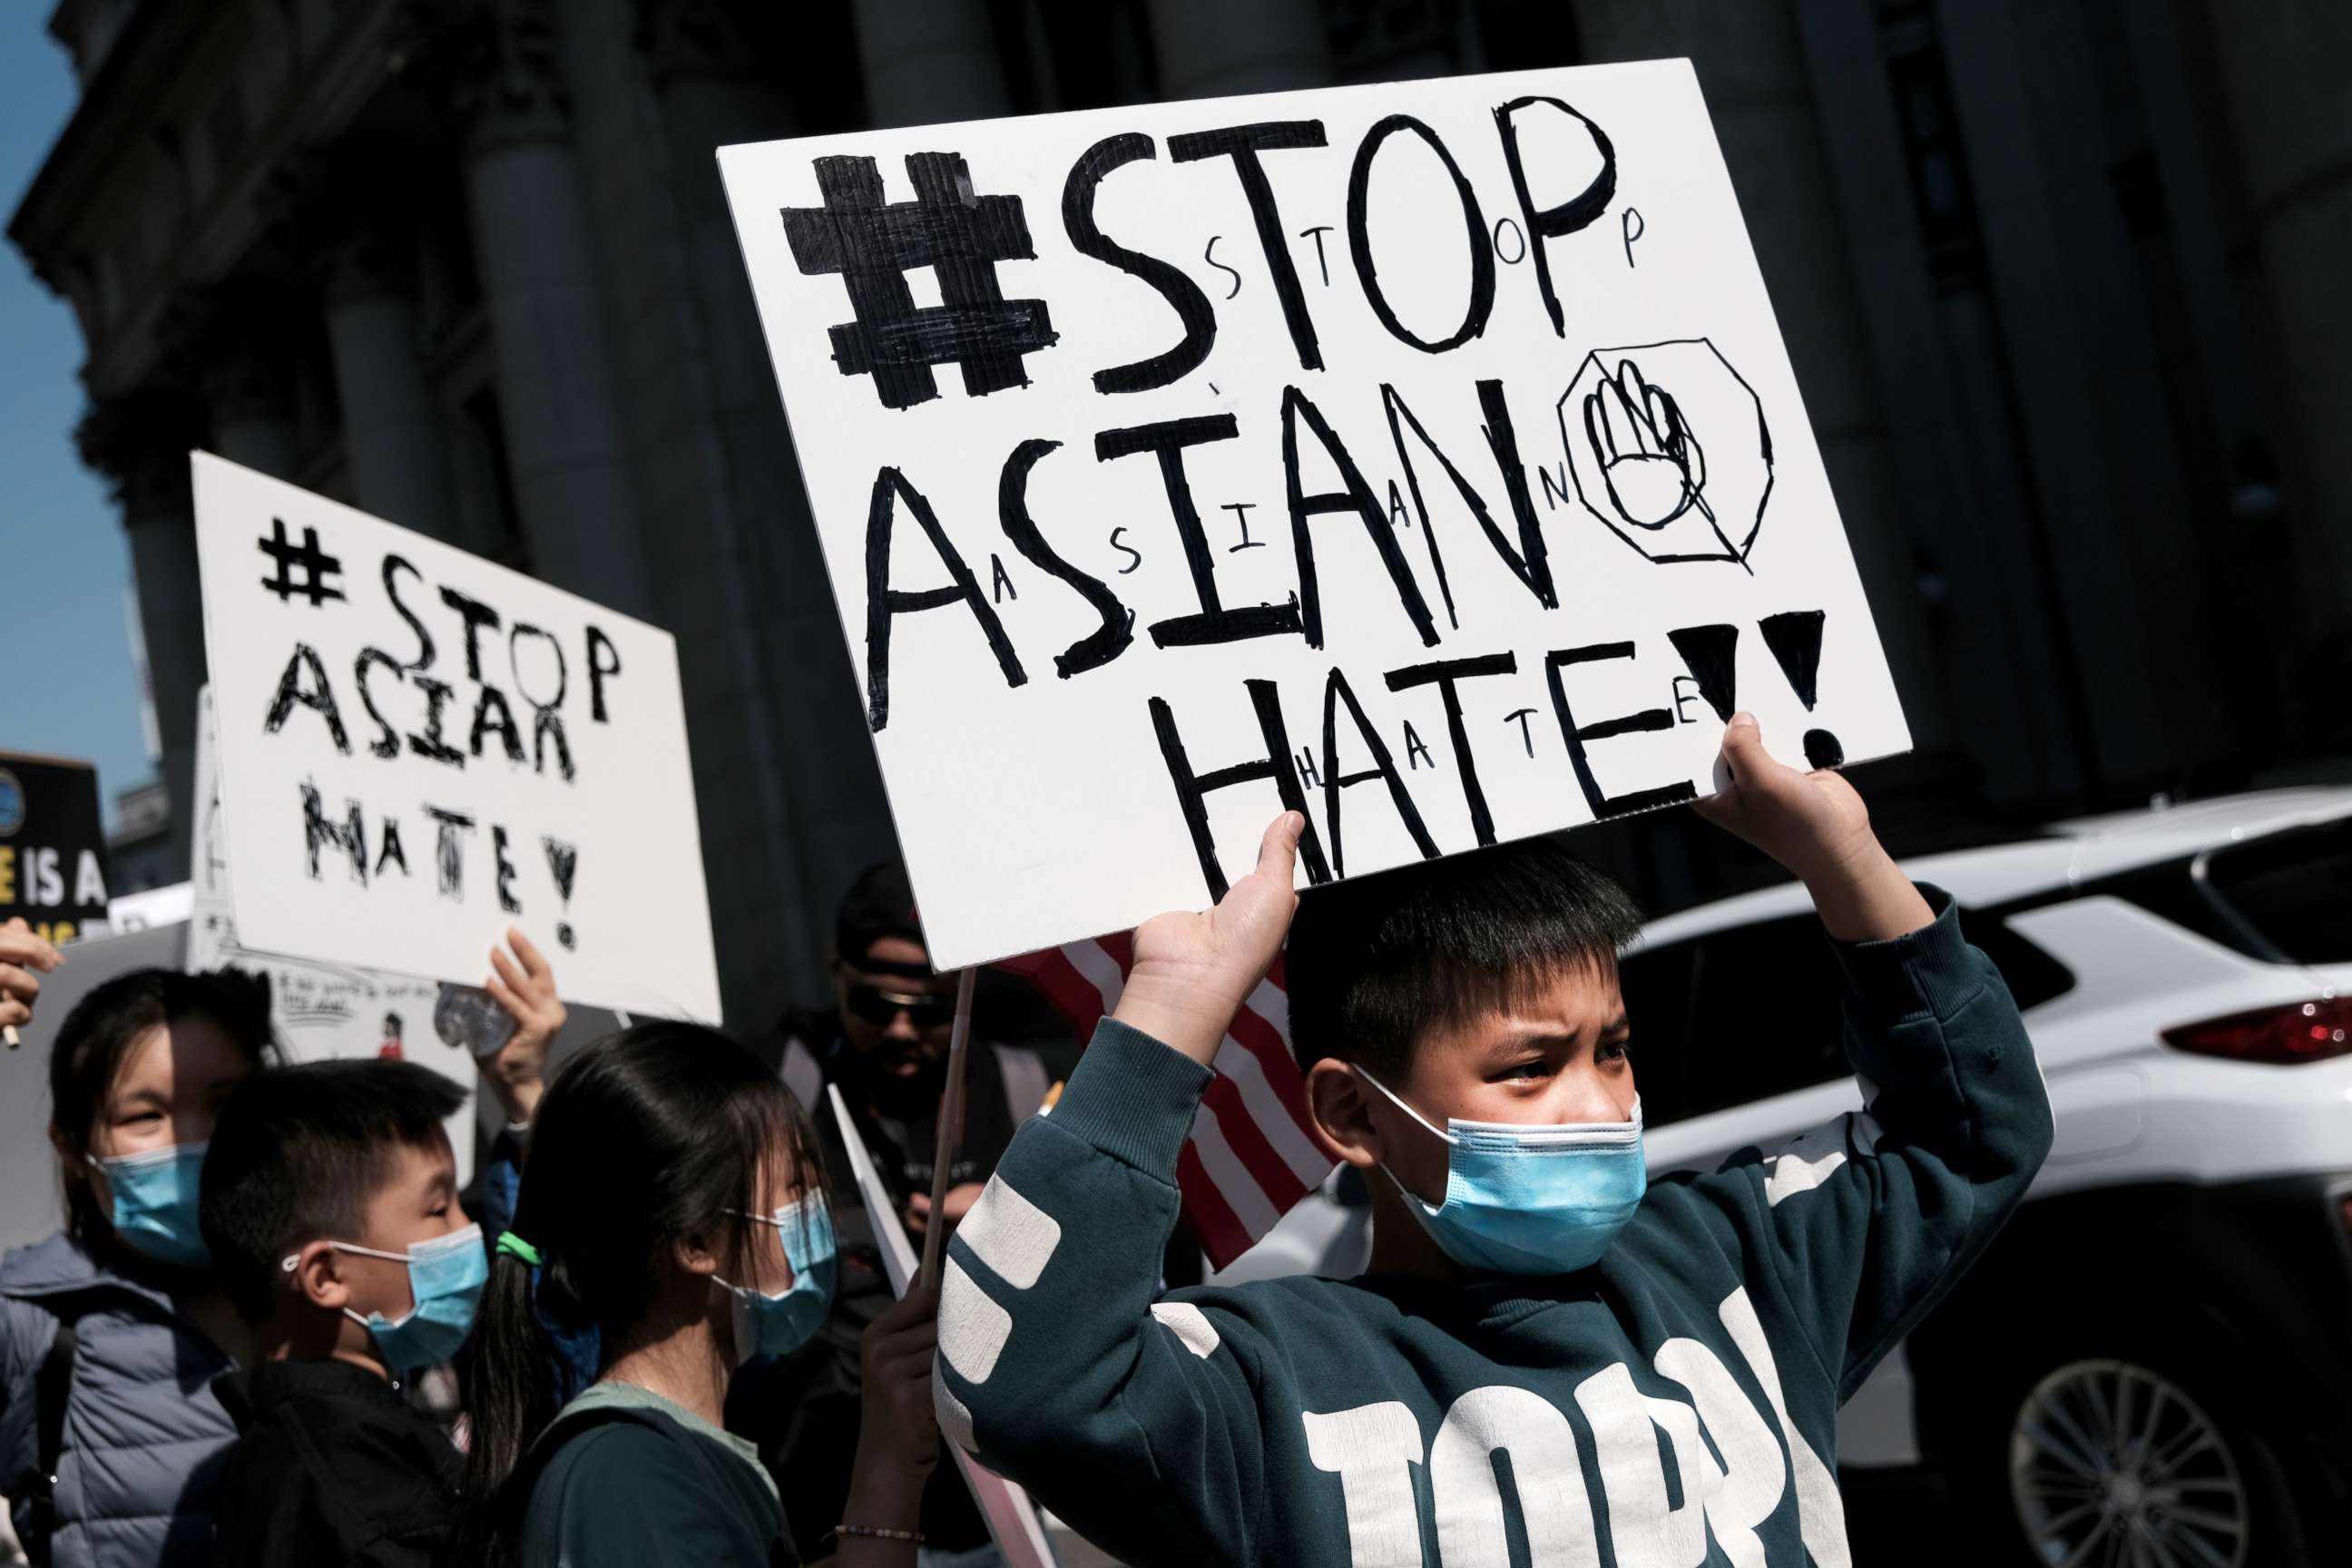 PHOTO: People participate in a protest to demand an end to anti-Asian violence, April 4, 2021, in New York City.